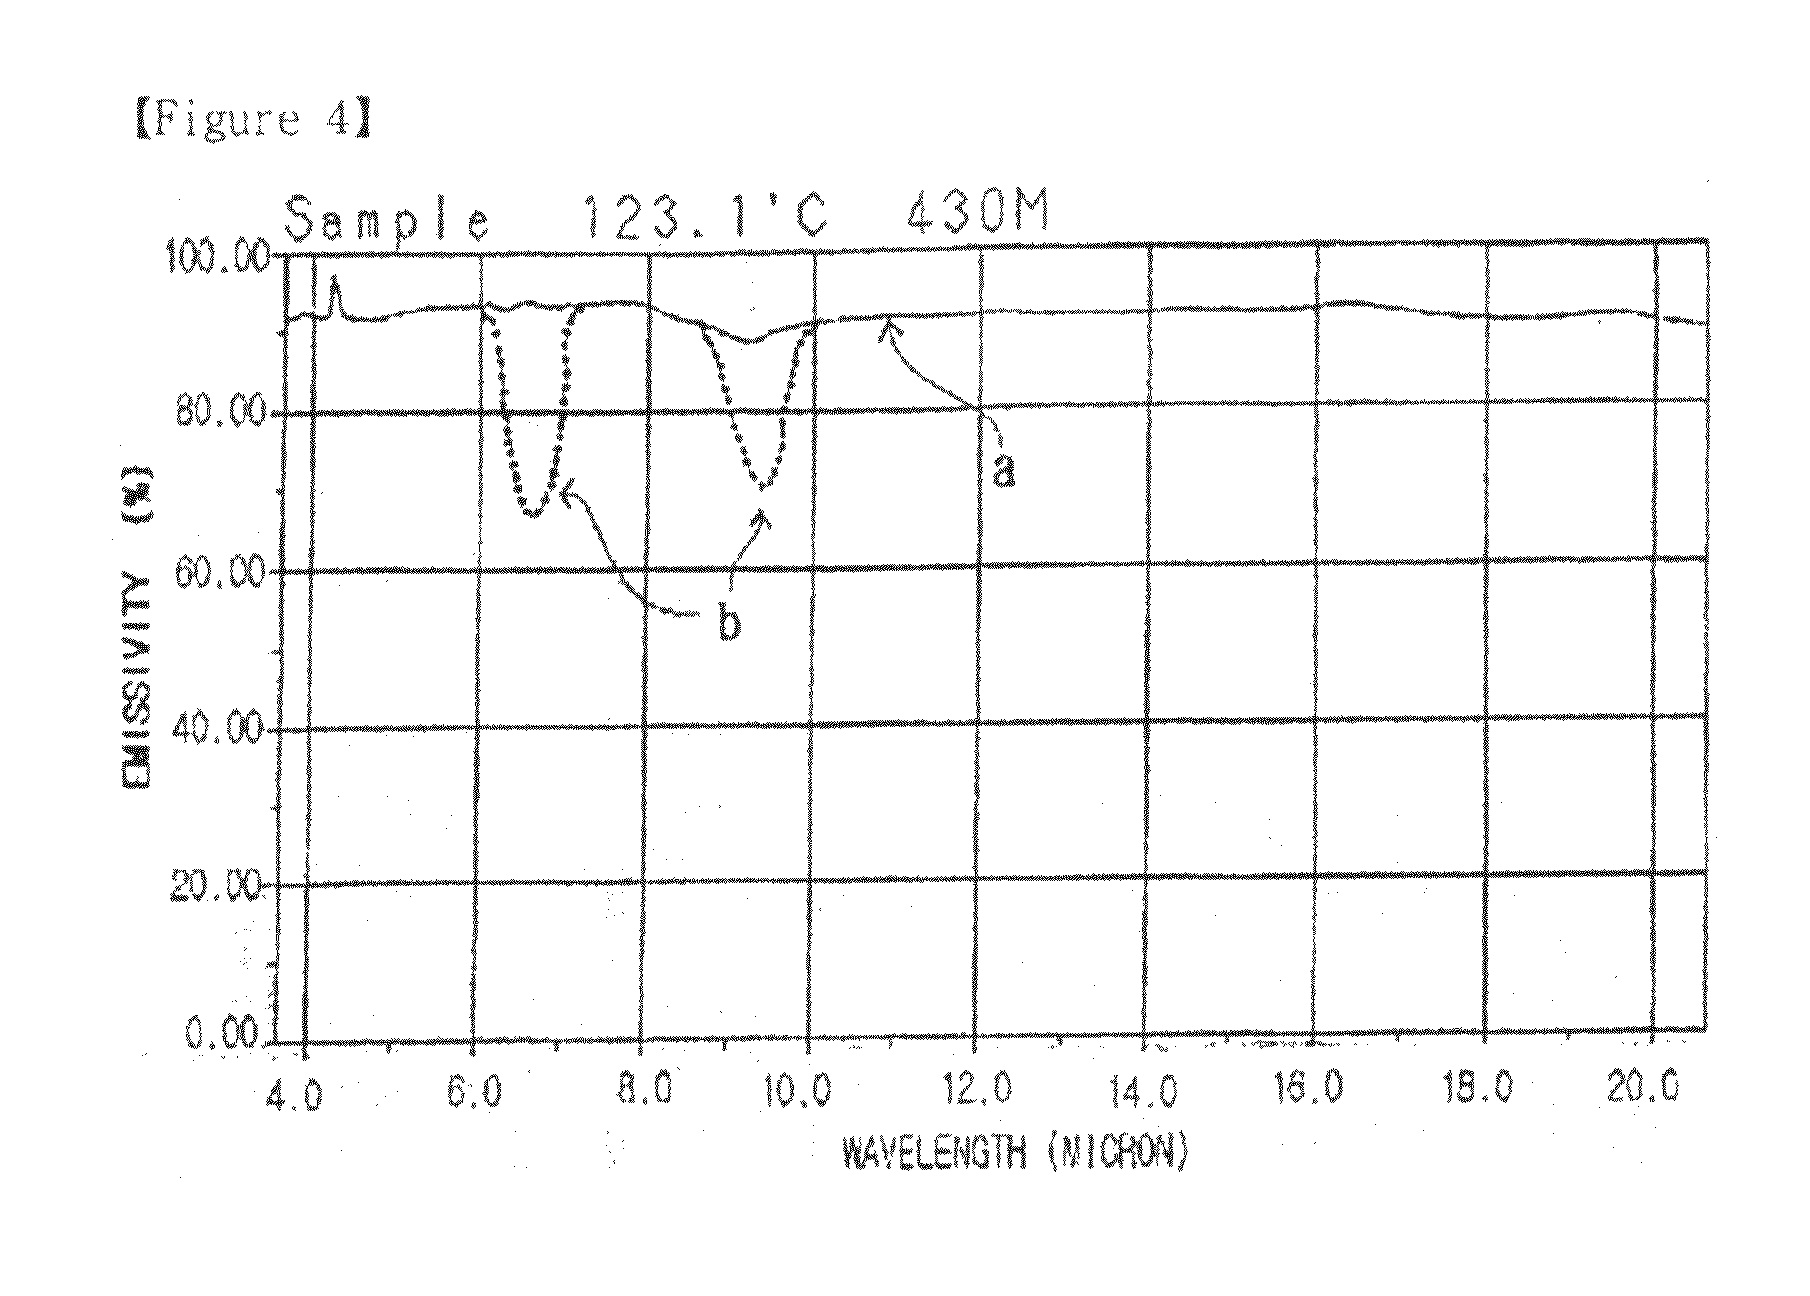 Composition for ceramics with carbon layer and manufactured method of ceramics using this